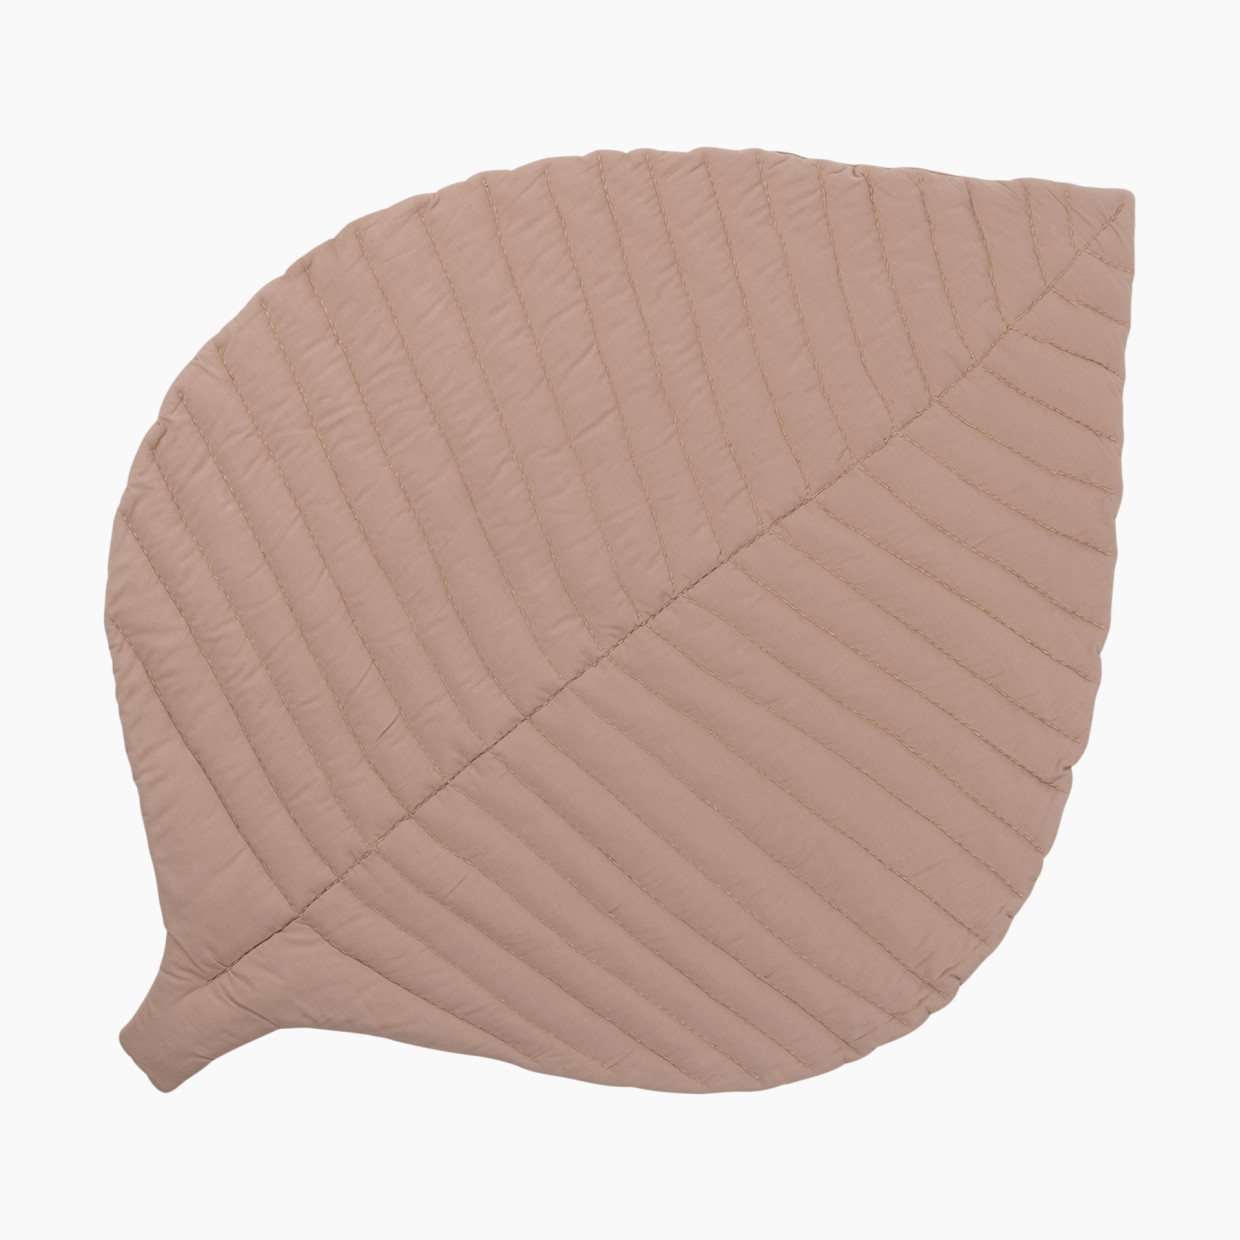 Toddlekind Organic Cotton Quilted Leaf Play Mat - Sea Shell.